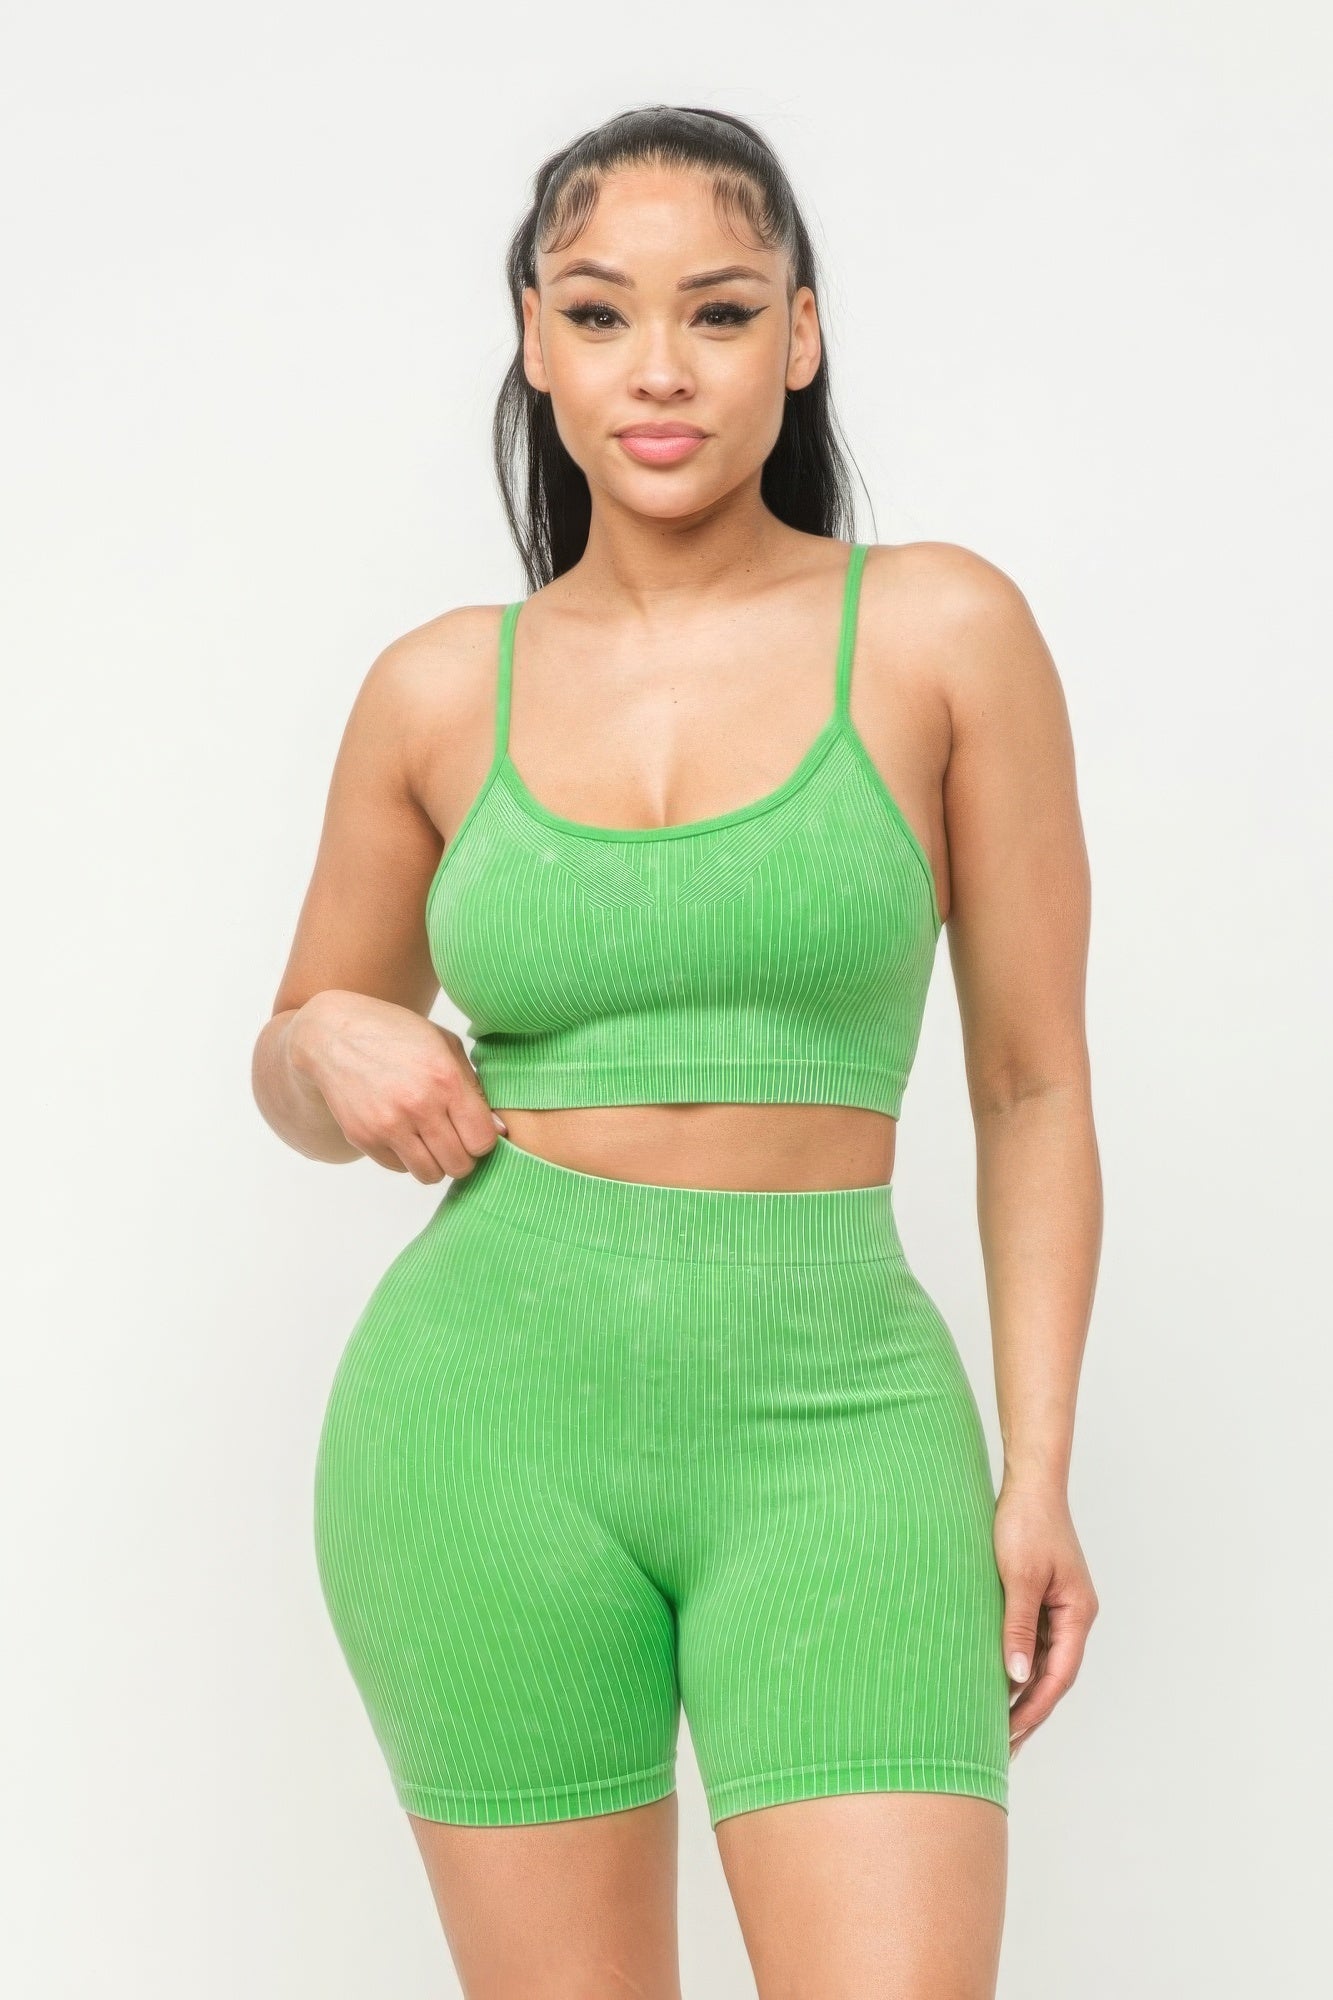 Washed Seamless Basic Tank Top And Shorts Set | APPAREL, BASICS & ACTIVEWEAR, Black, CCPRODUCTS, Lime, NEW ARRIVALS, Pink, SETS | Bodiied